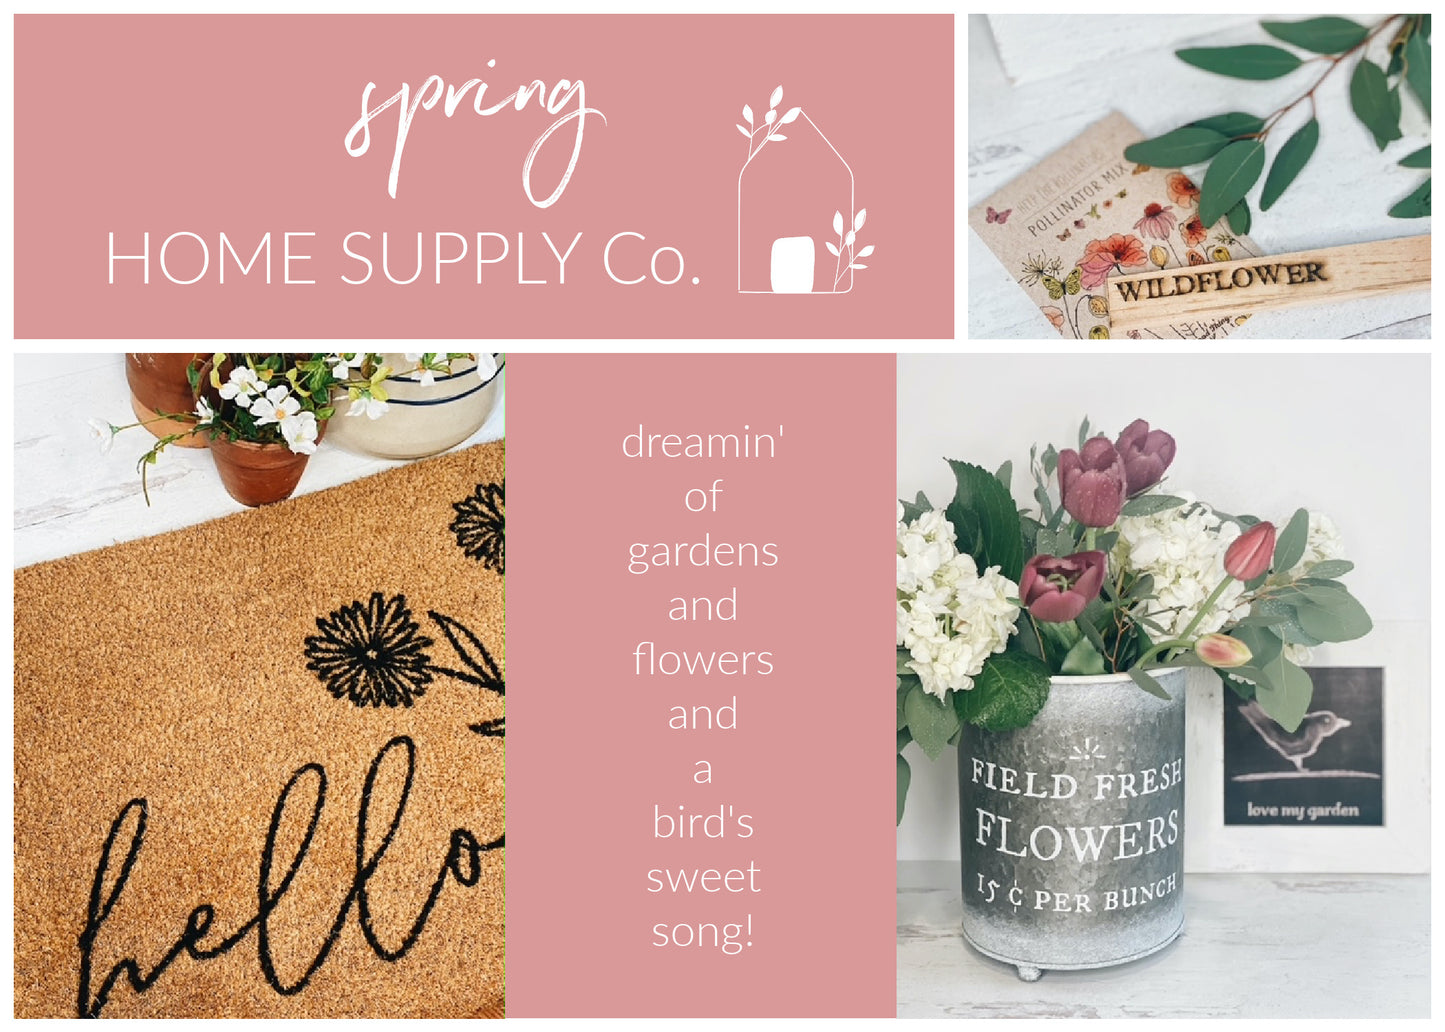 Home Supply Co. Subscription Box- Next Up Summer Box - shipping mid June!